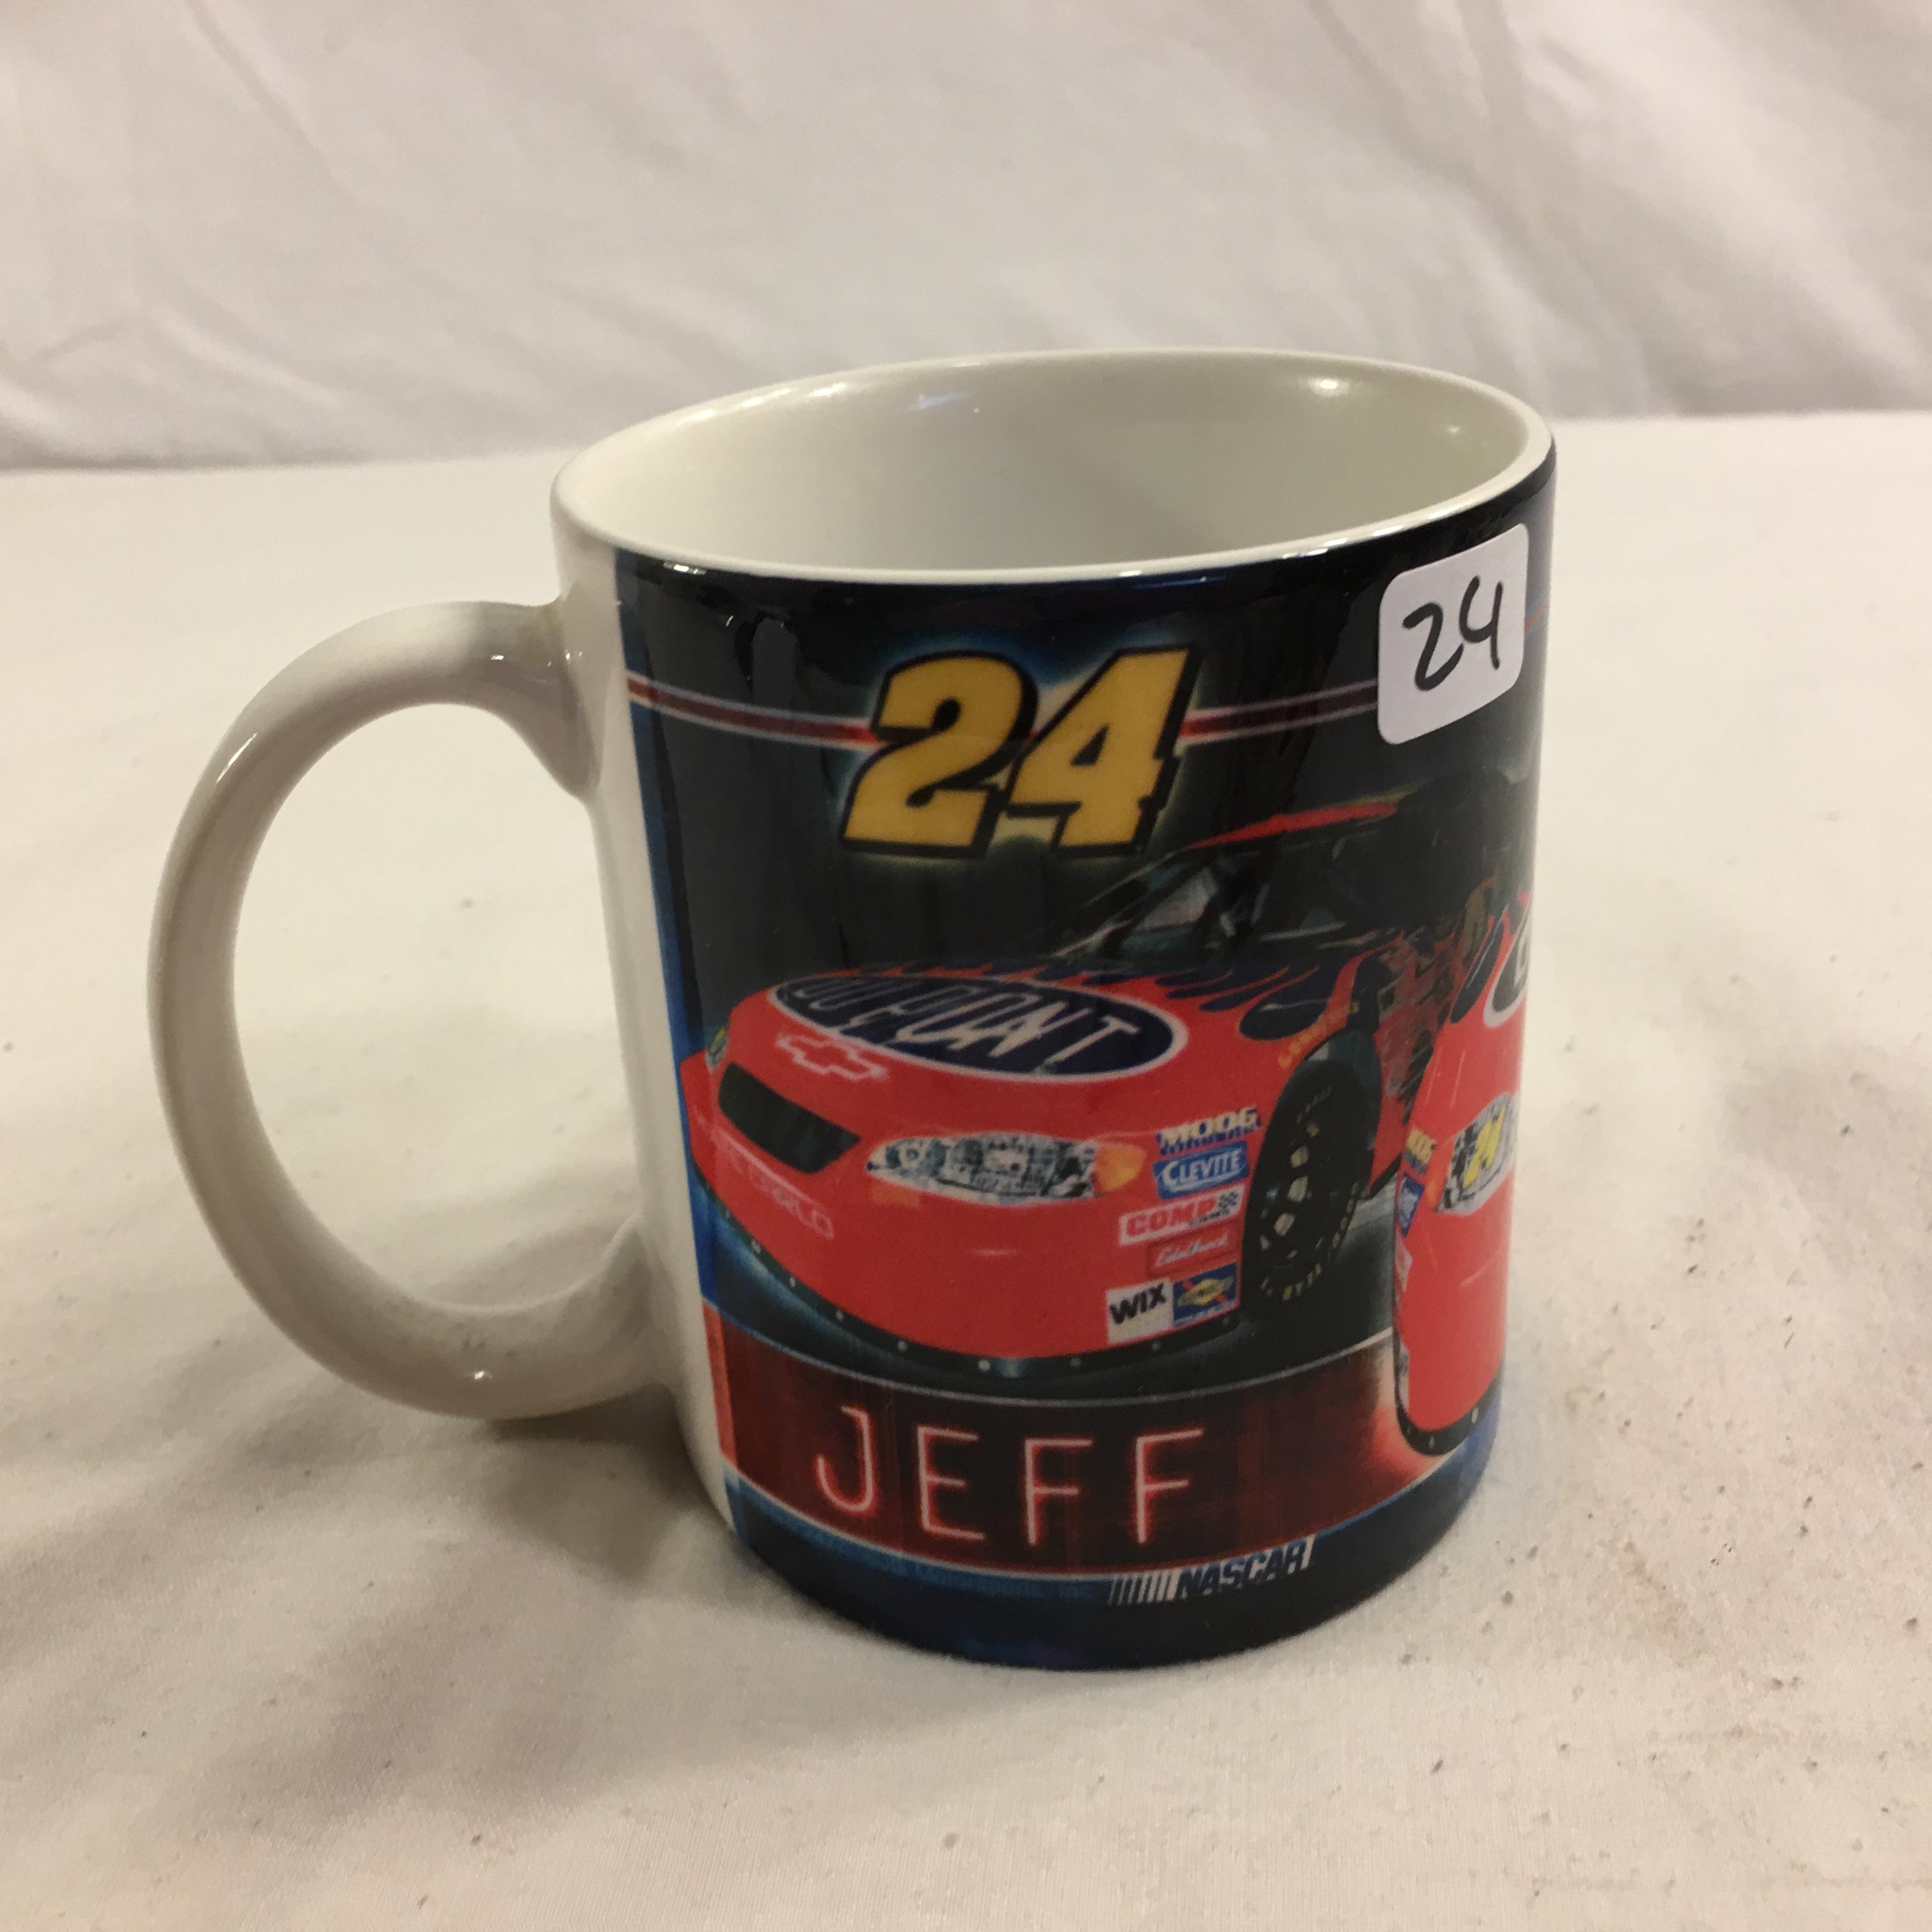 Collector Loose Nascar Jeff Gorodn #24 Mug Size: 4"tall - See Pictures